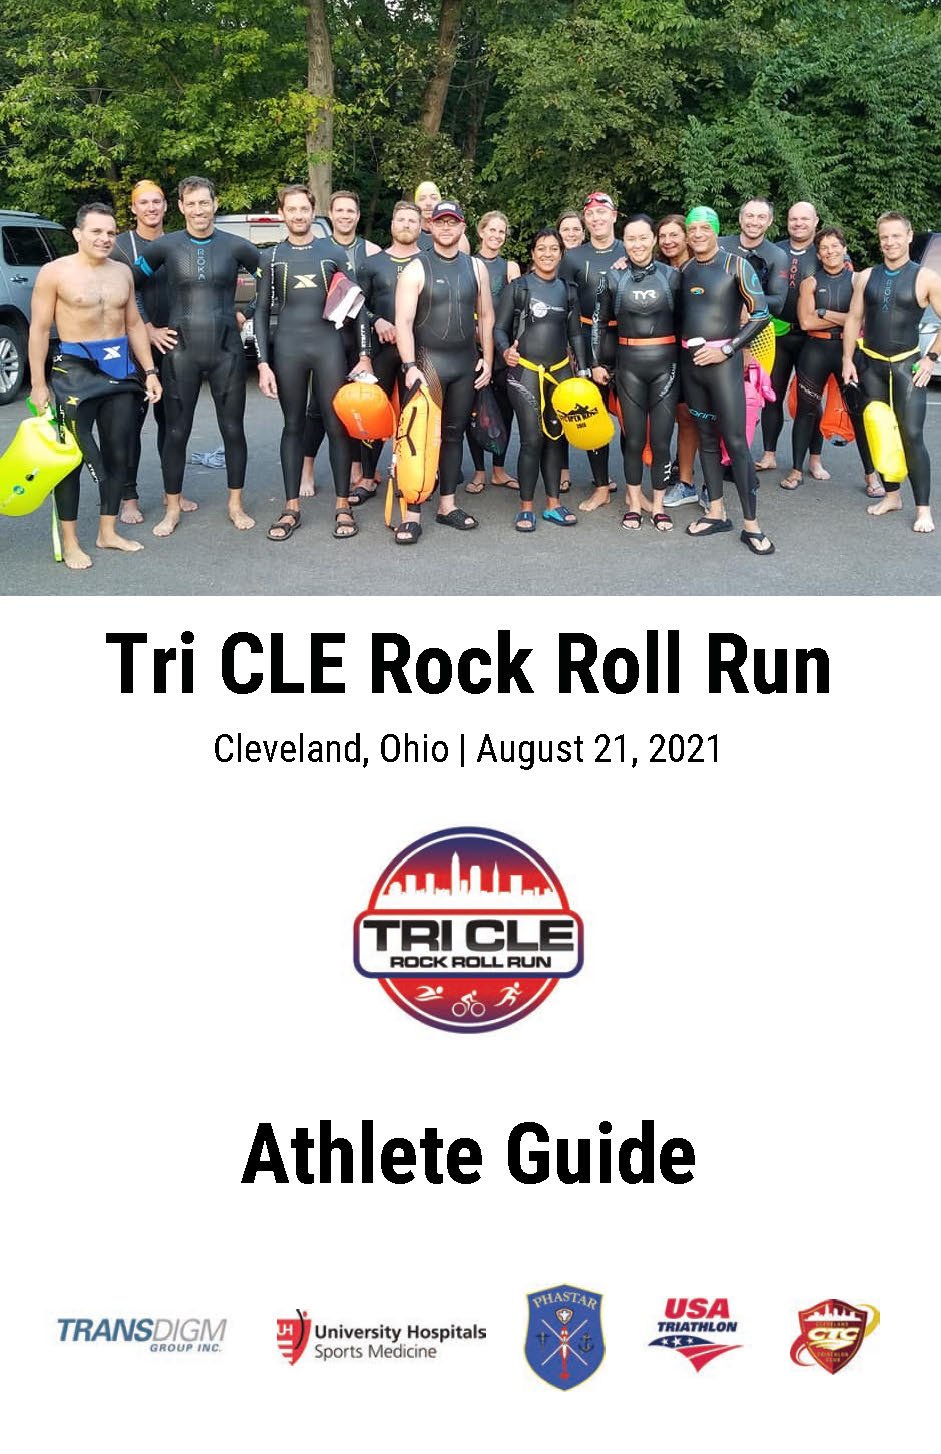 Tri CLE_Athlete Guide_8.13.2021_Page_01.jpg